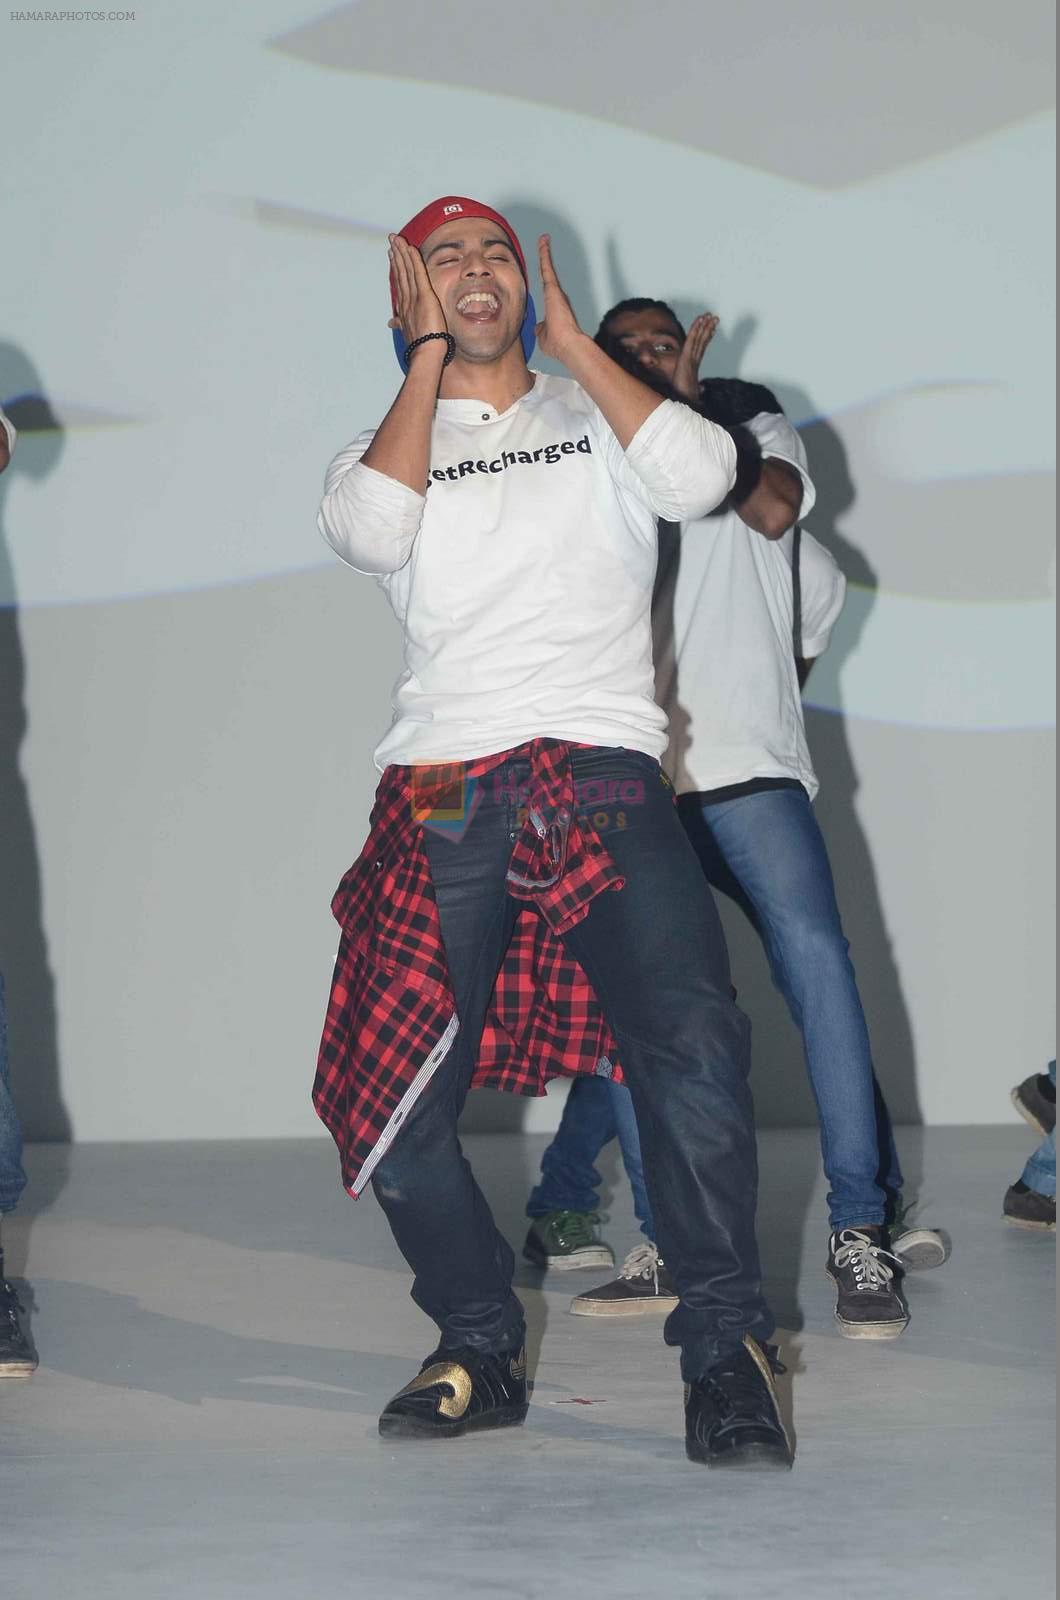 varun Dhawan's 4D music and dance performance in association with Pond's men and ABCD 2 in Byculla on 7th June 2015